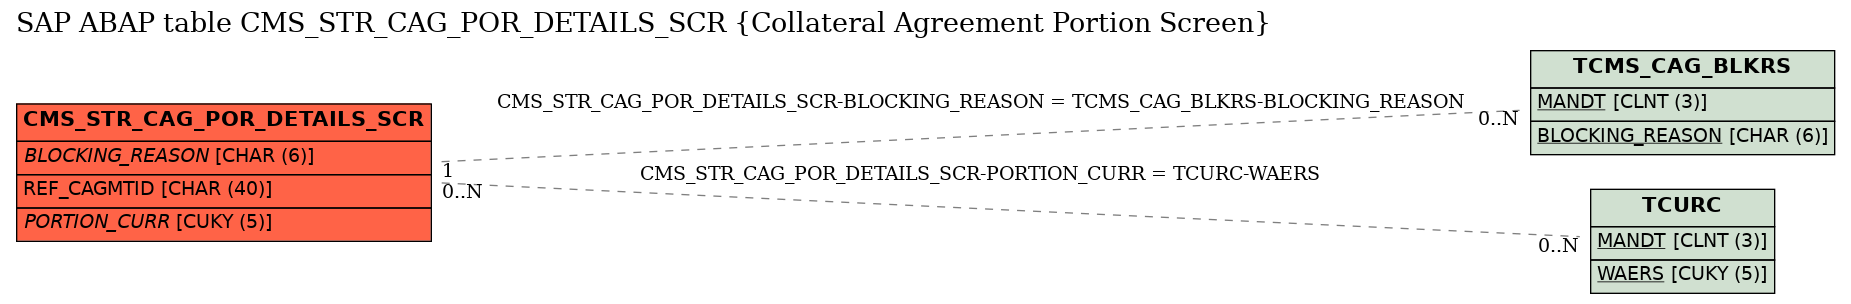 E-R Diagram for table CMS_STR_CAG_POR_DETAILS_SCR (Collateral Agreement Portion Screen)